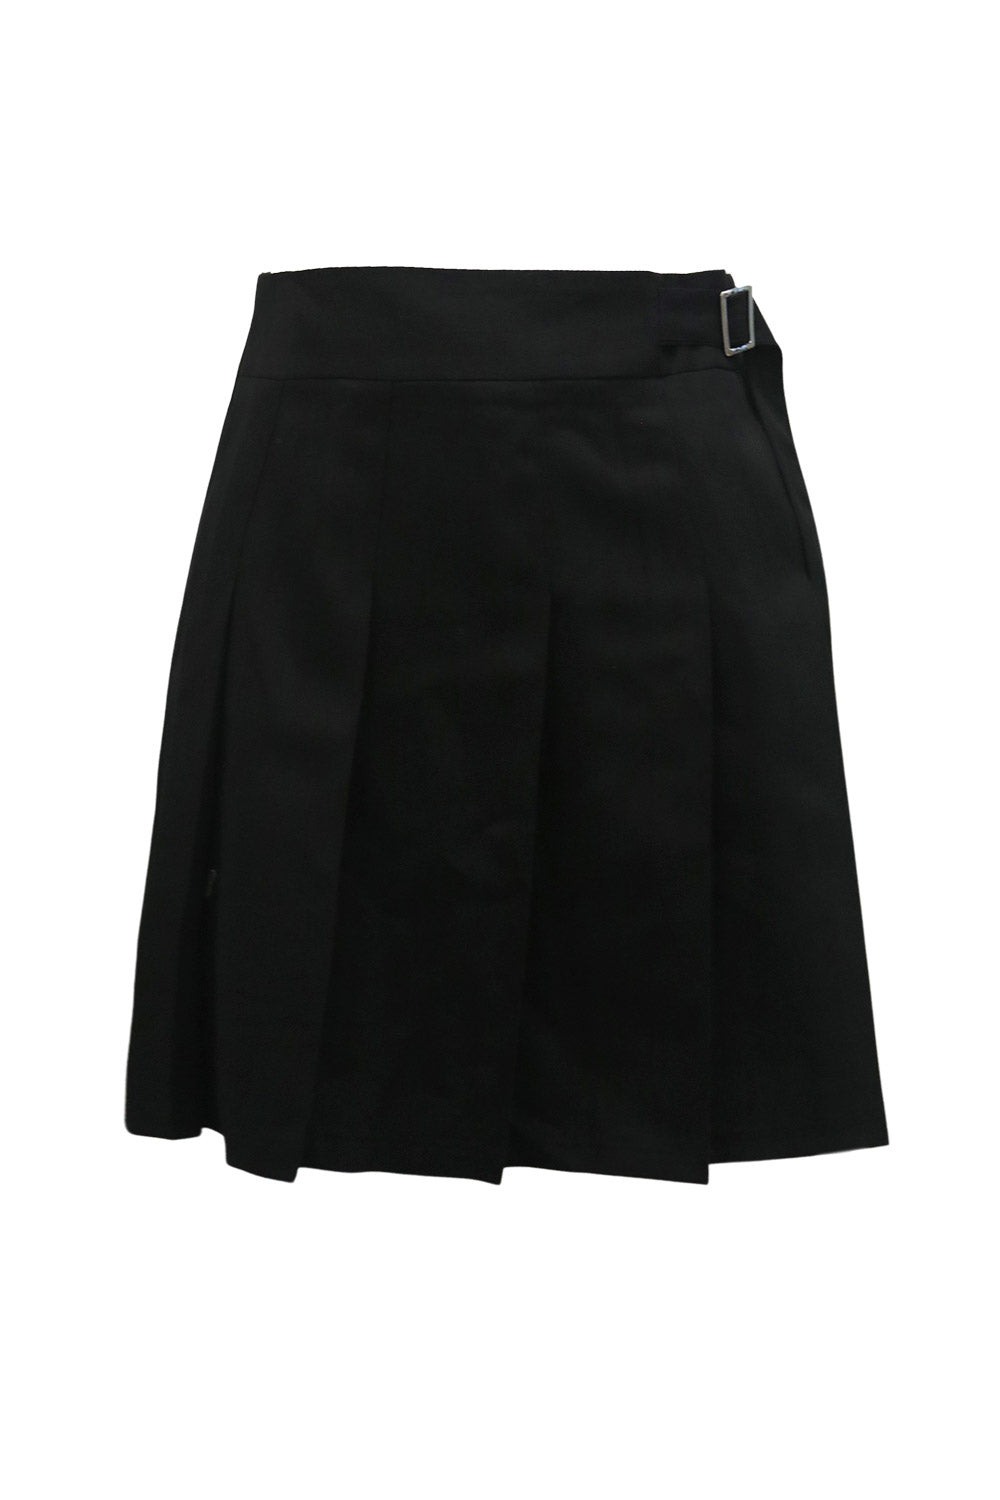 storets.com Allie Belted Pleated Skirt